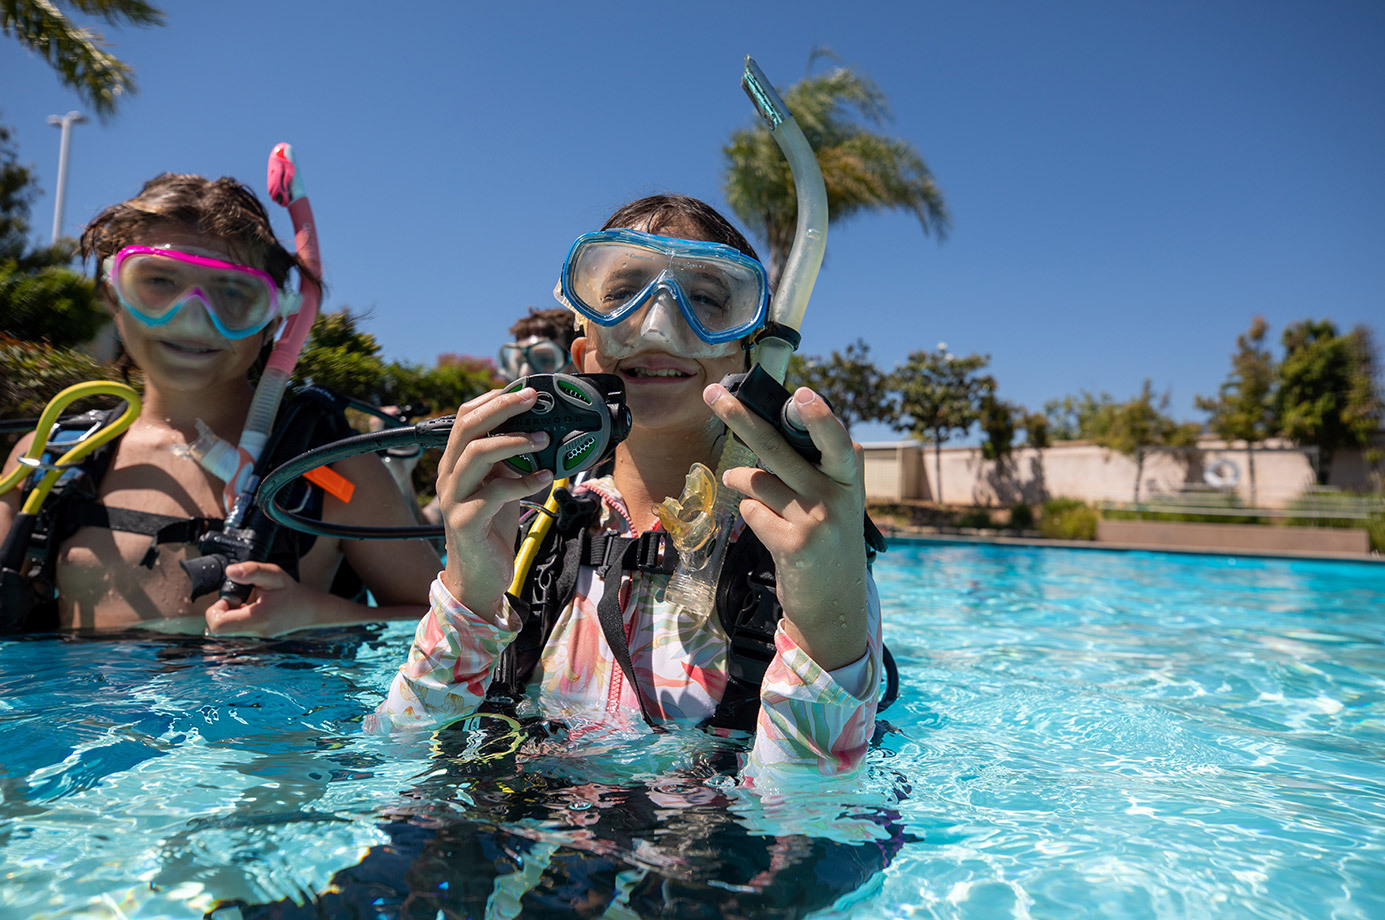 a young scuba diver adjusts her gear in a swimming pool